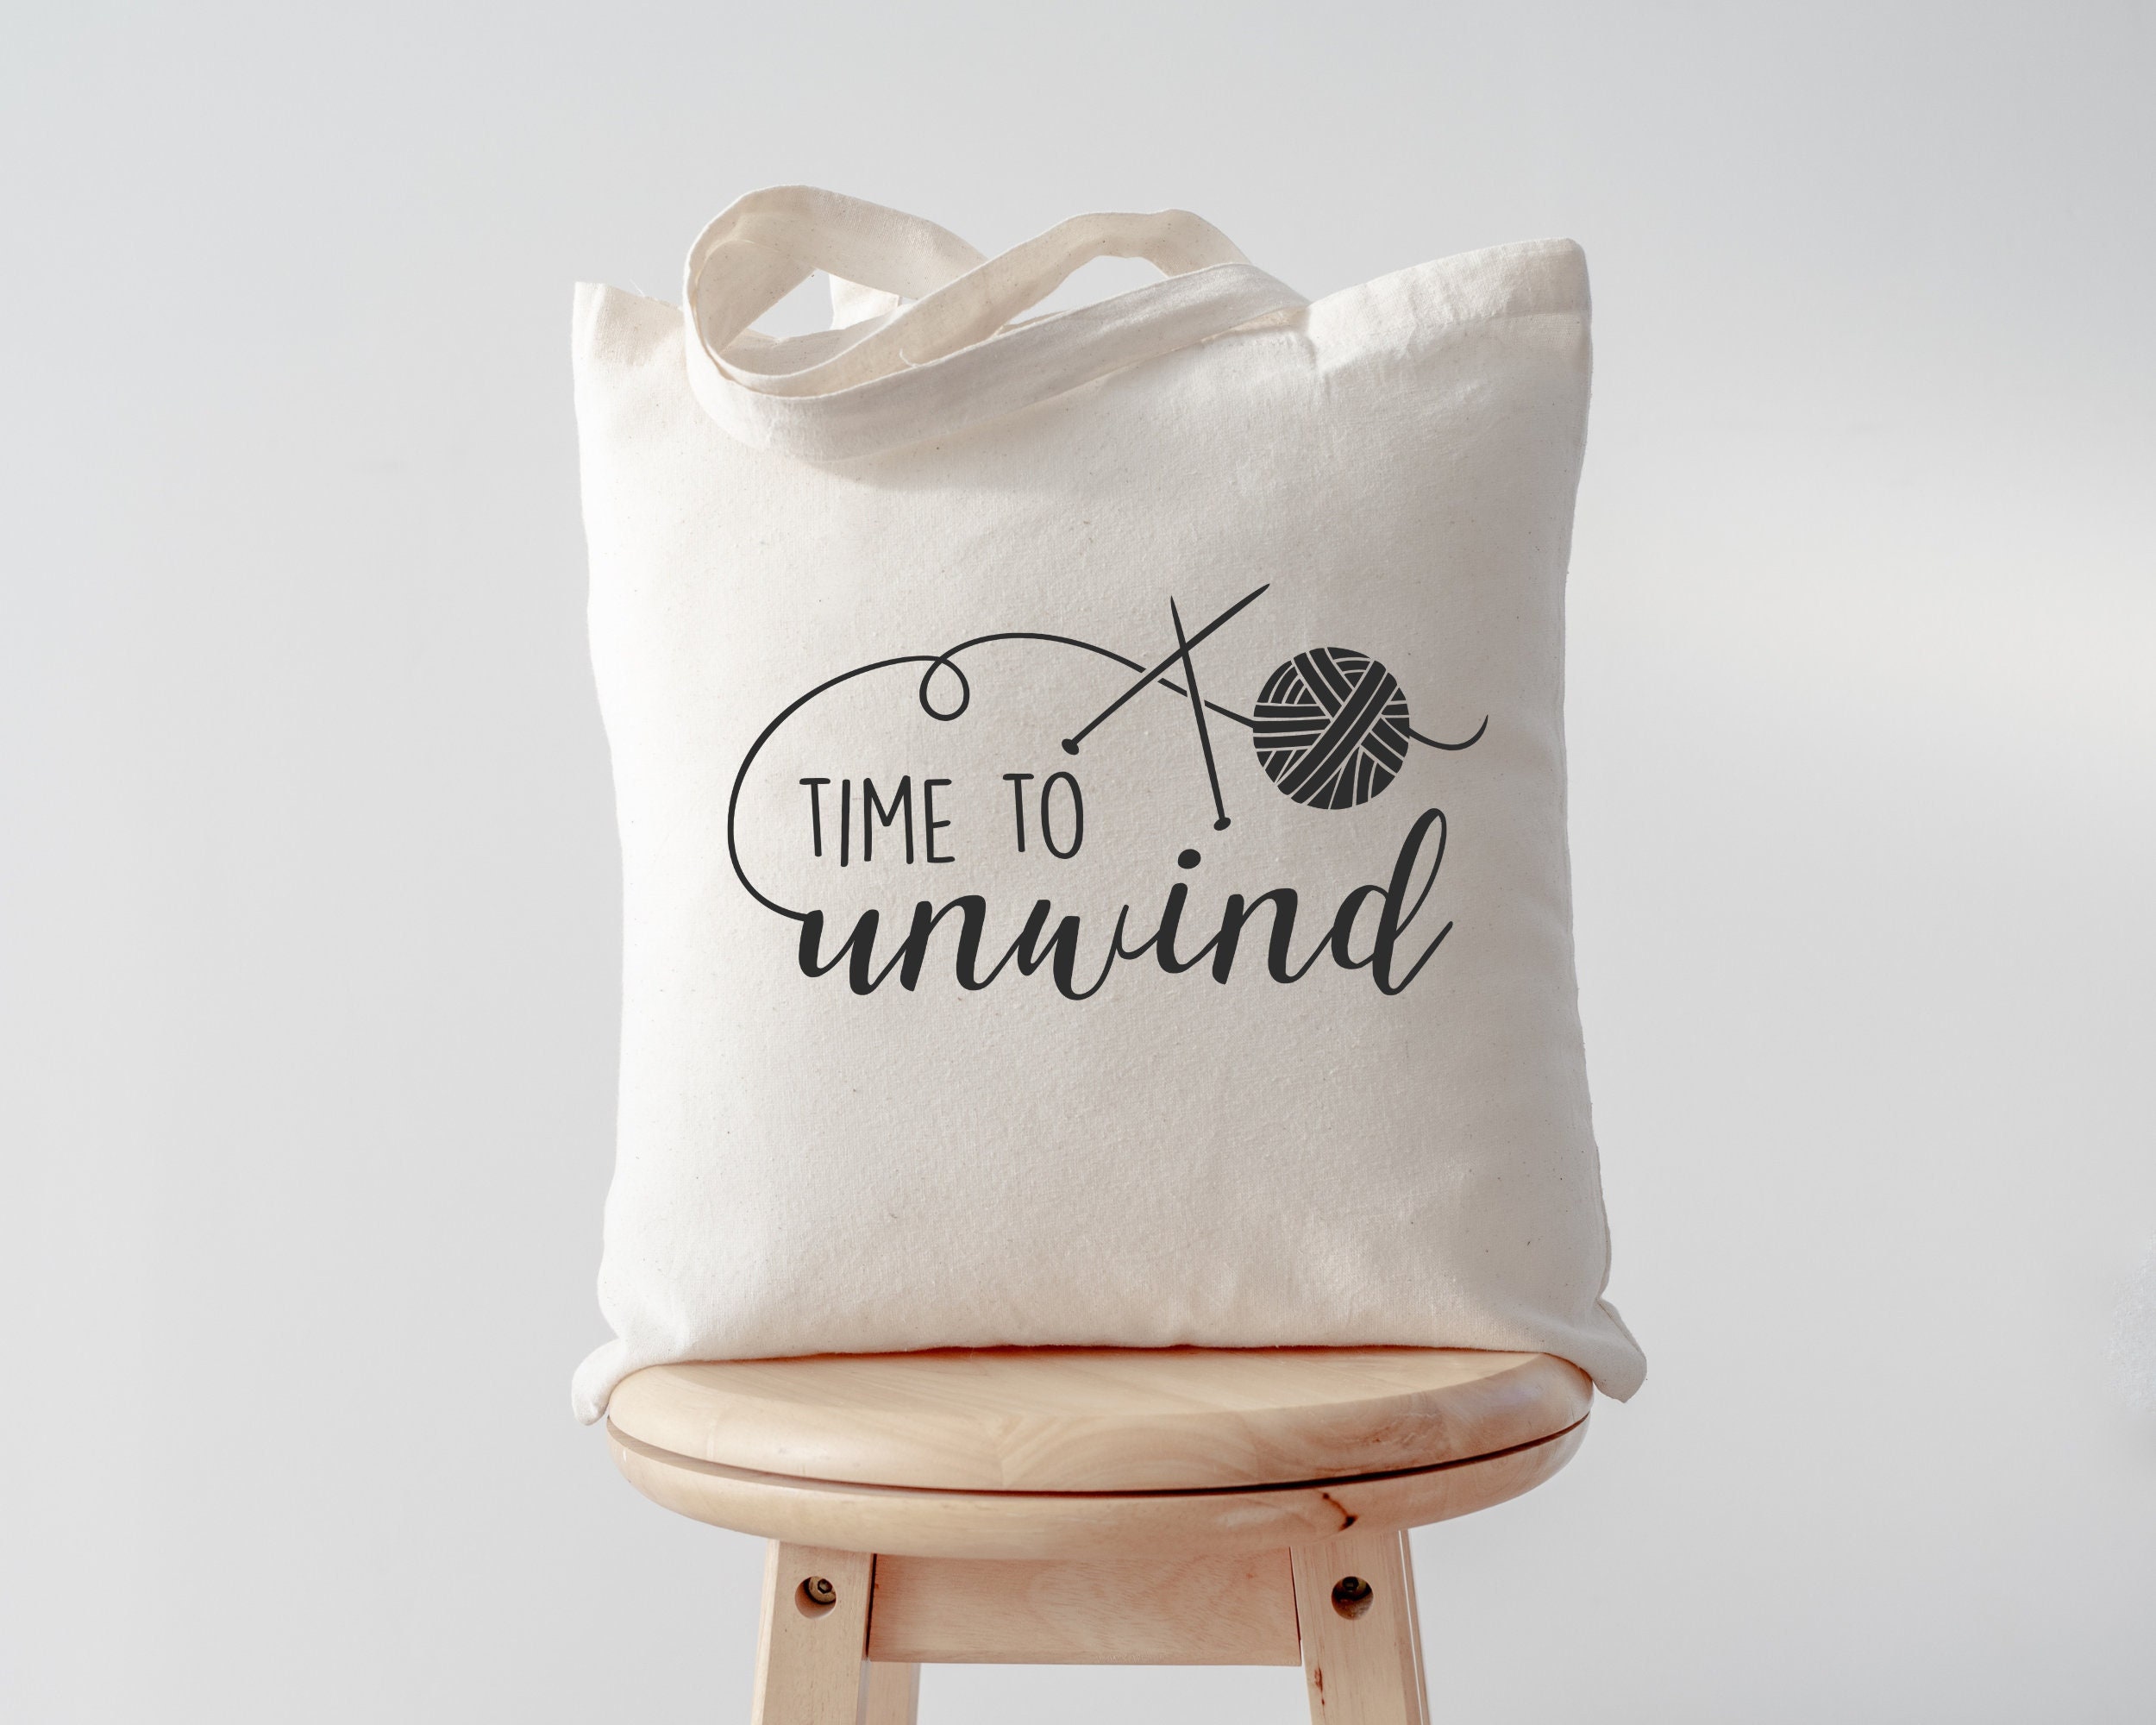 Time to unwind knitting tote bag for crafts shopping storage